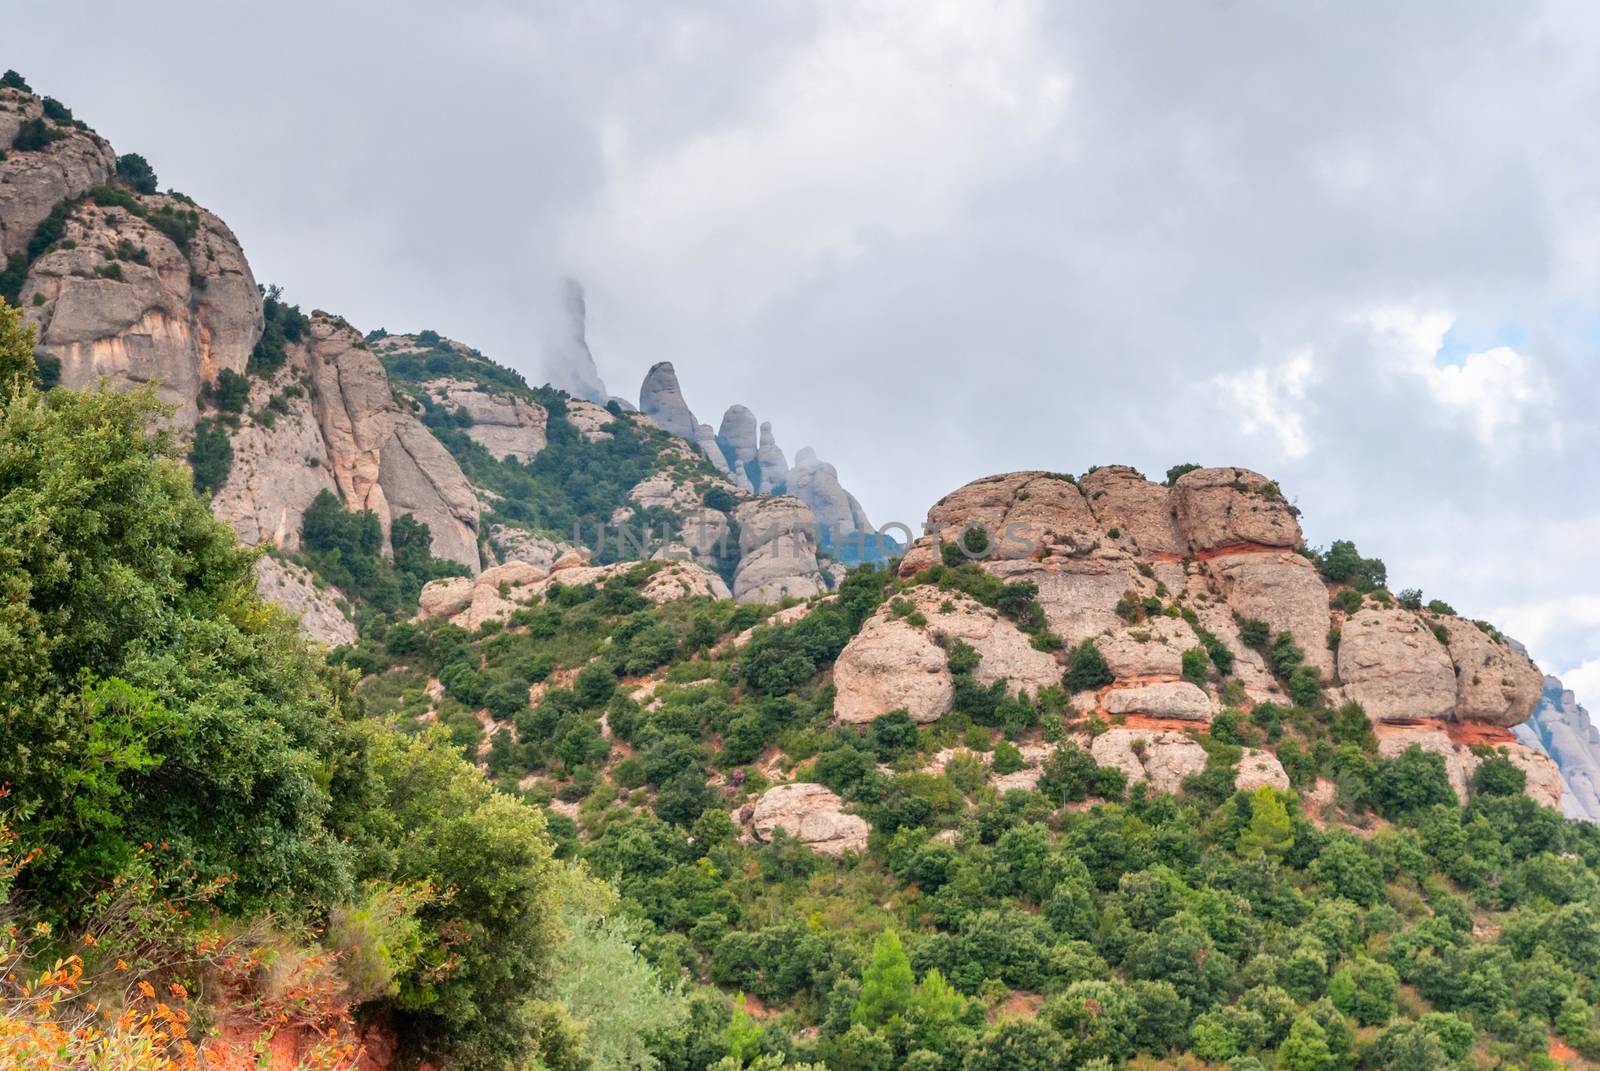 Hazy unusual mountains with green trees and cloudy sky near Montserrat Monastery,Spain by Zhukow